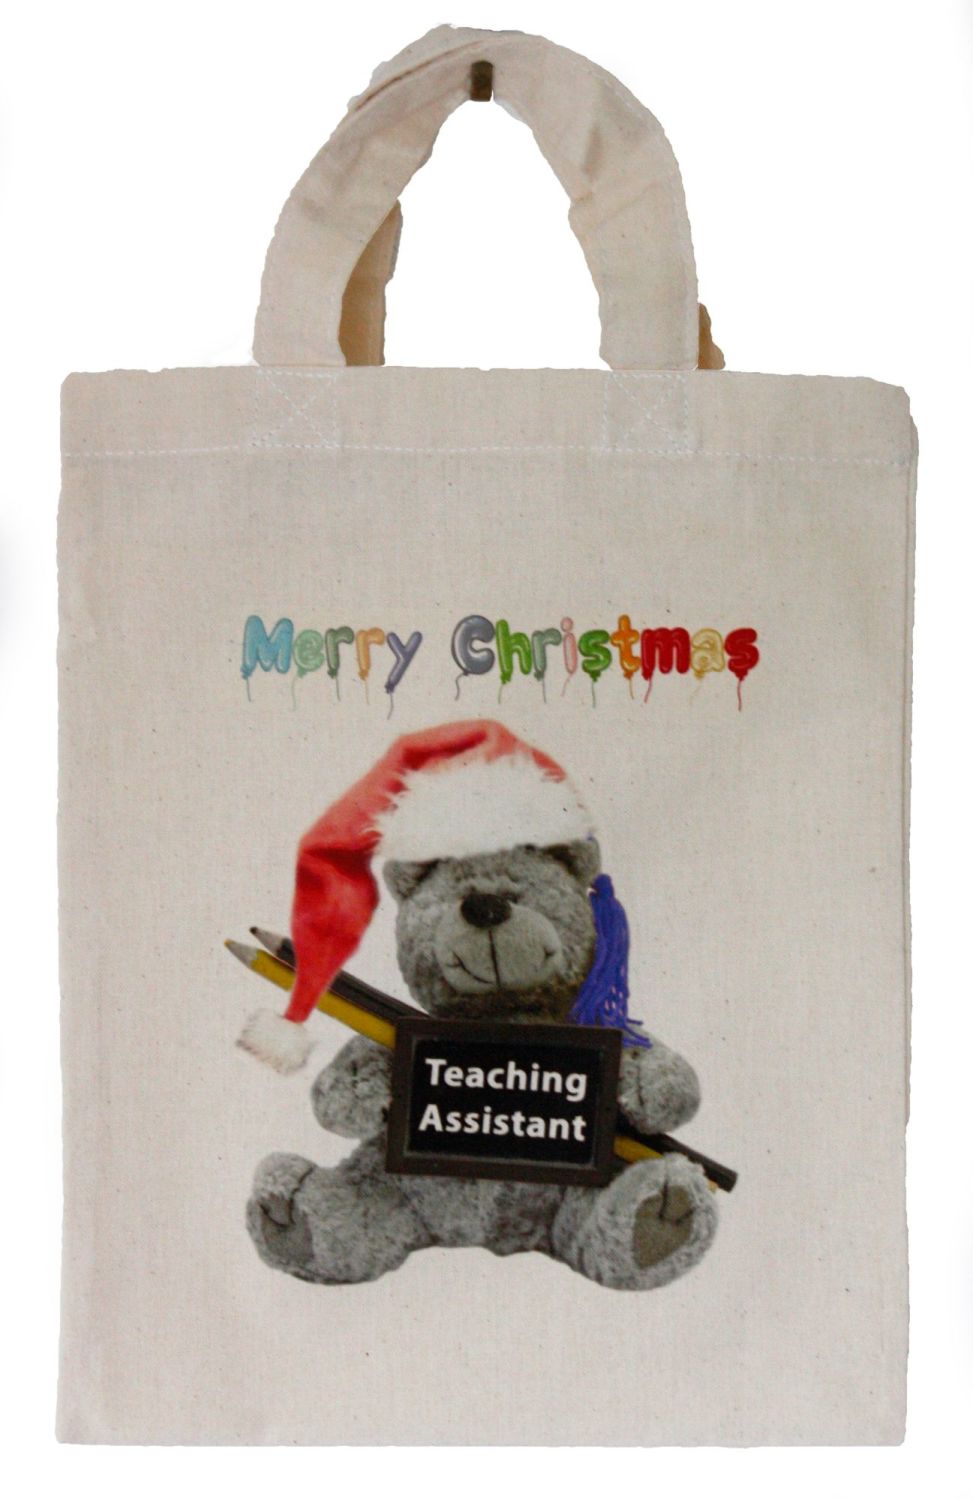 Merry Christmas (Teaching Assistant)